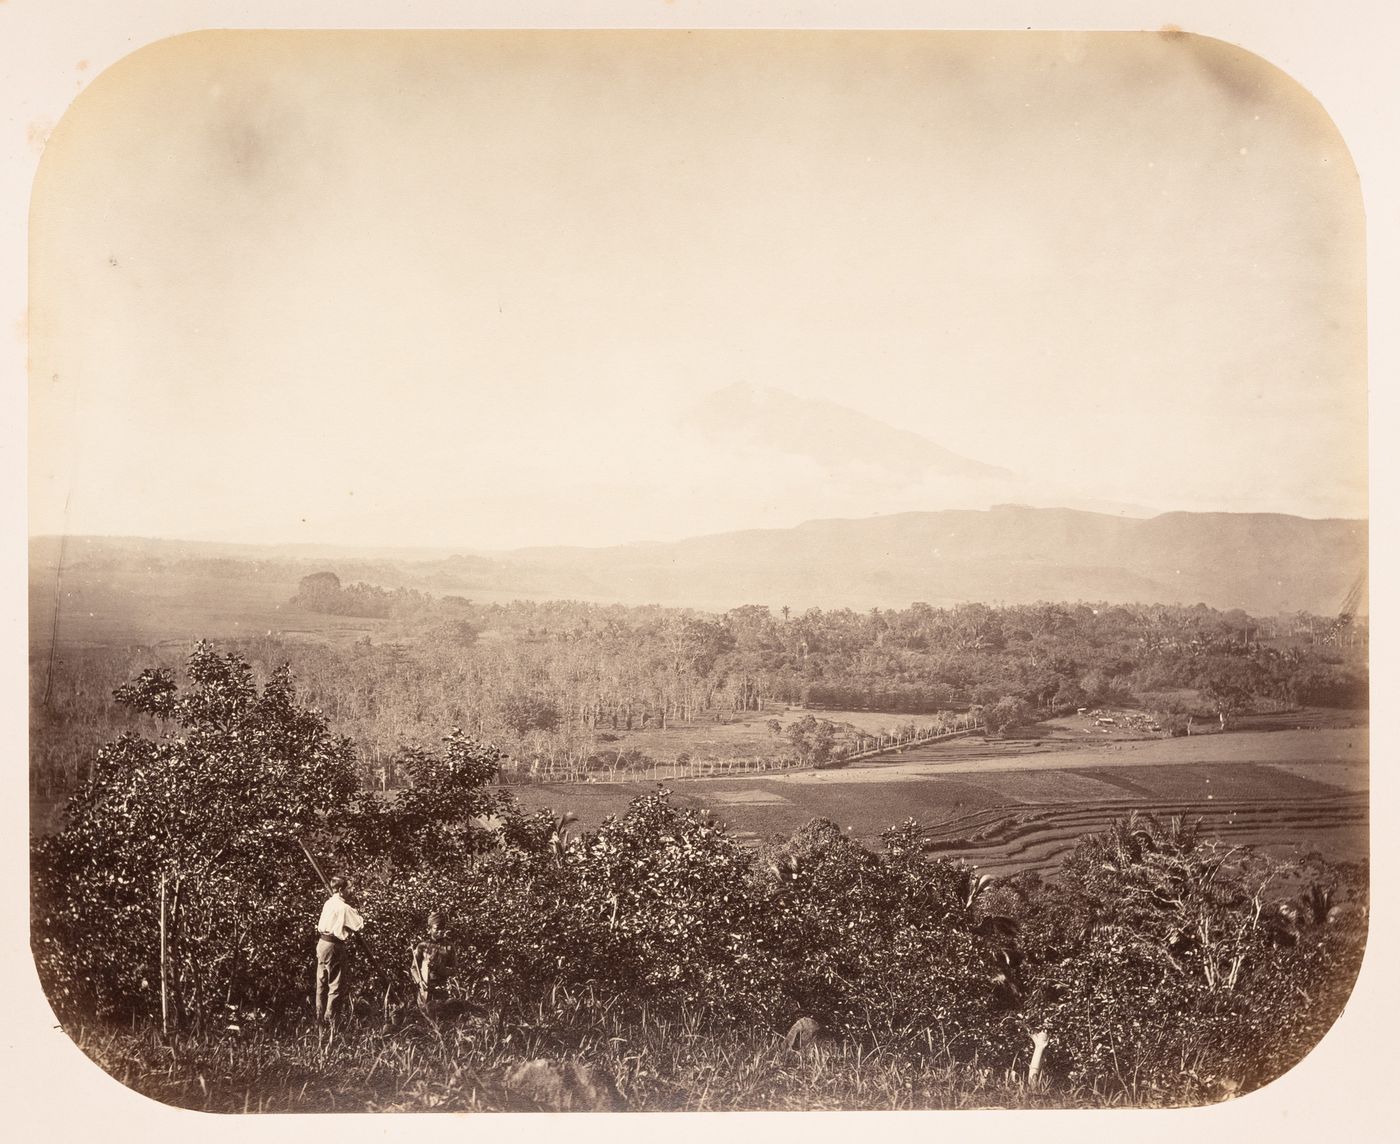 View of the countryside between Semarang and Solo (now also known as Surakarta) showing a valley and a volcano, Dutch East Indies (now Indonesia)